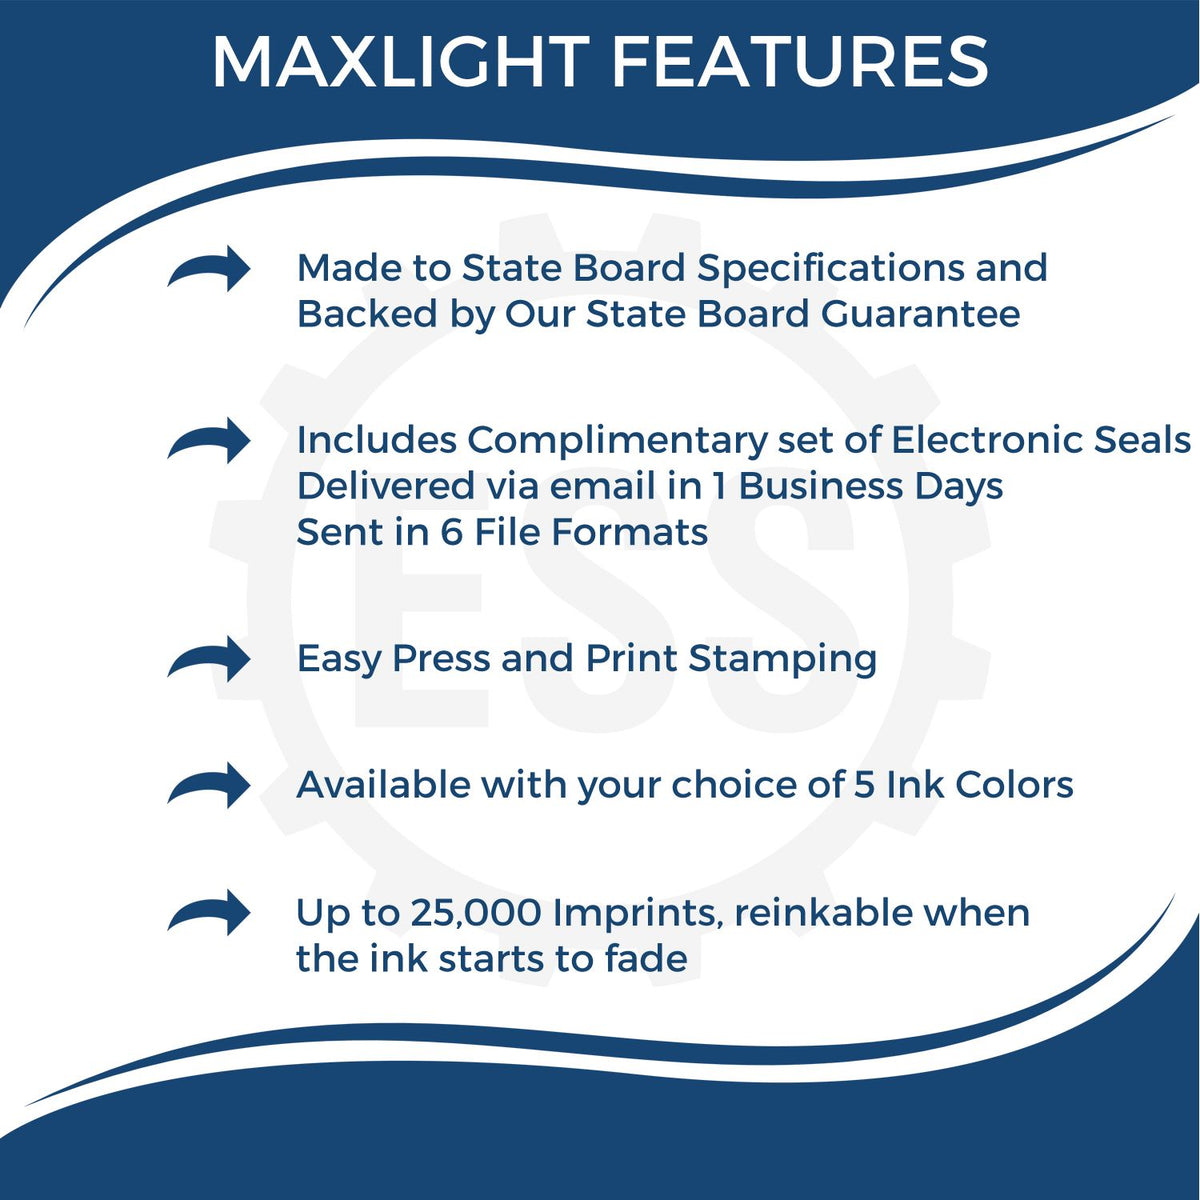 A picture of an infographic highlighting the selling points for the Premium MaxLight Pre-Inked Nebraska Landscape Architectural Stamp